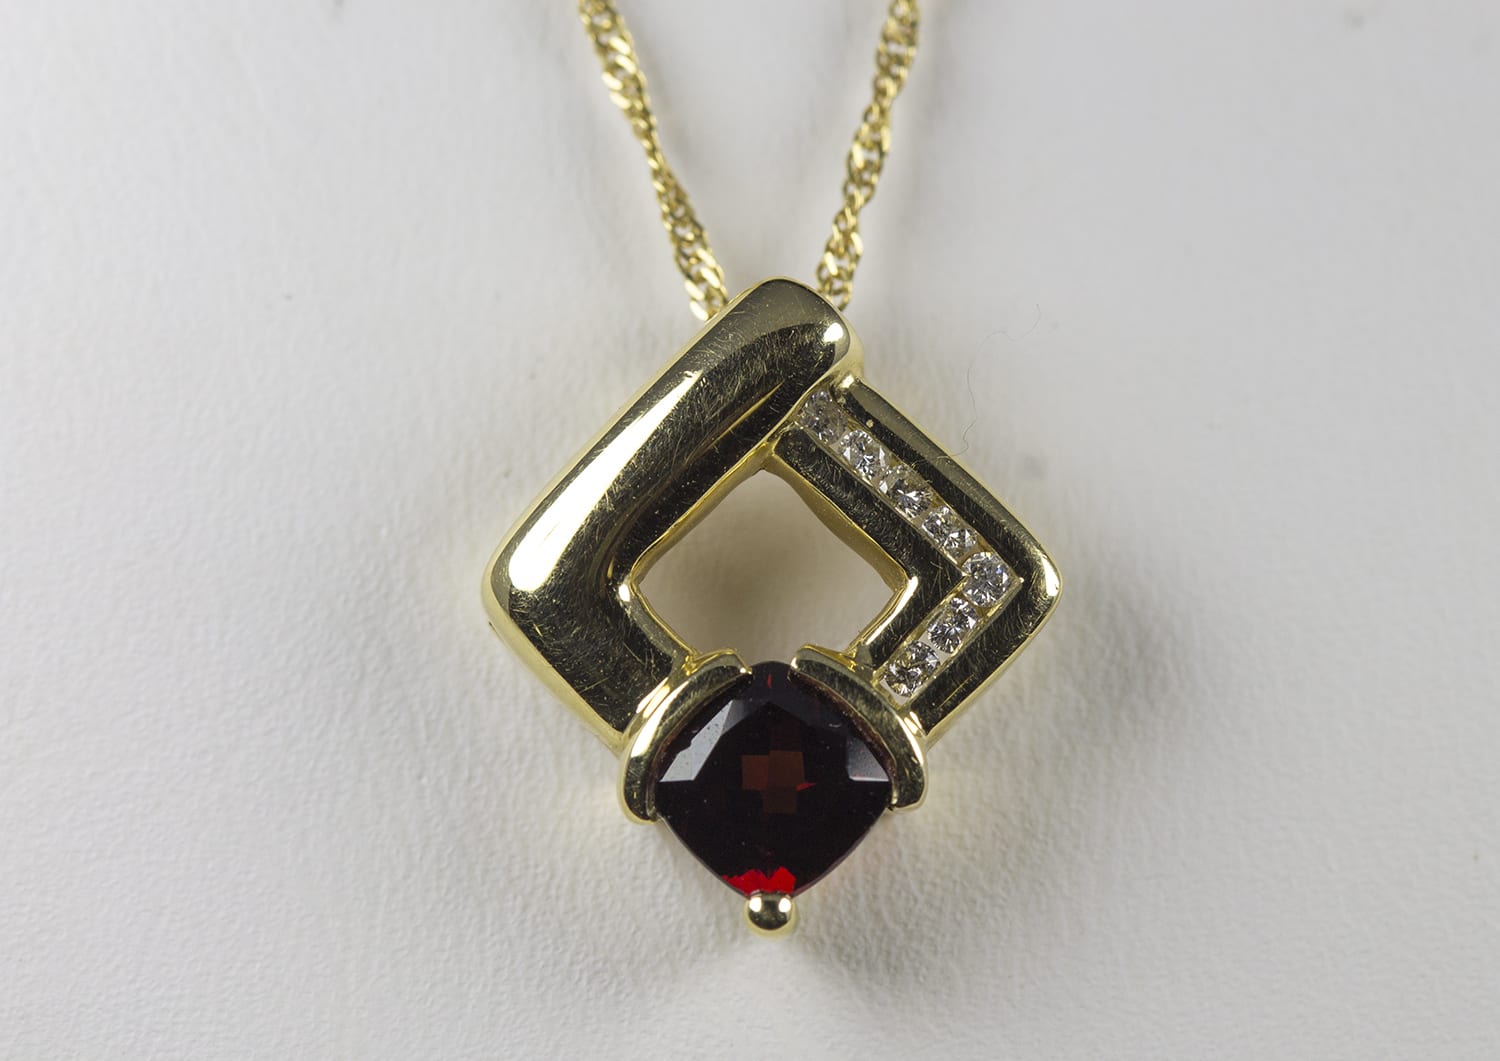 14k Yellow Gold Abstract Squared Slide Pendant Necklace w/ Cushion Garnet  Gemstone at Base and Melee Diamonds Channel Set on Corner - F495